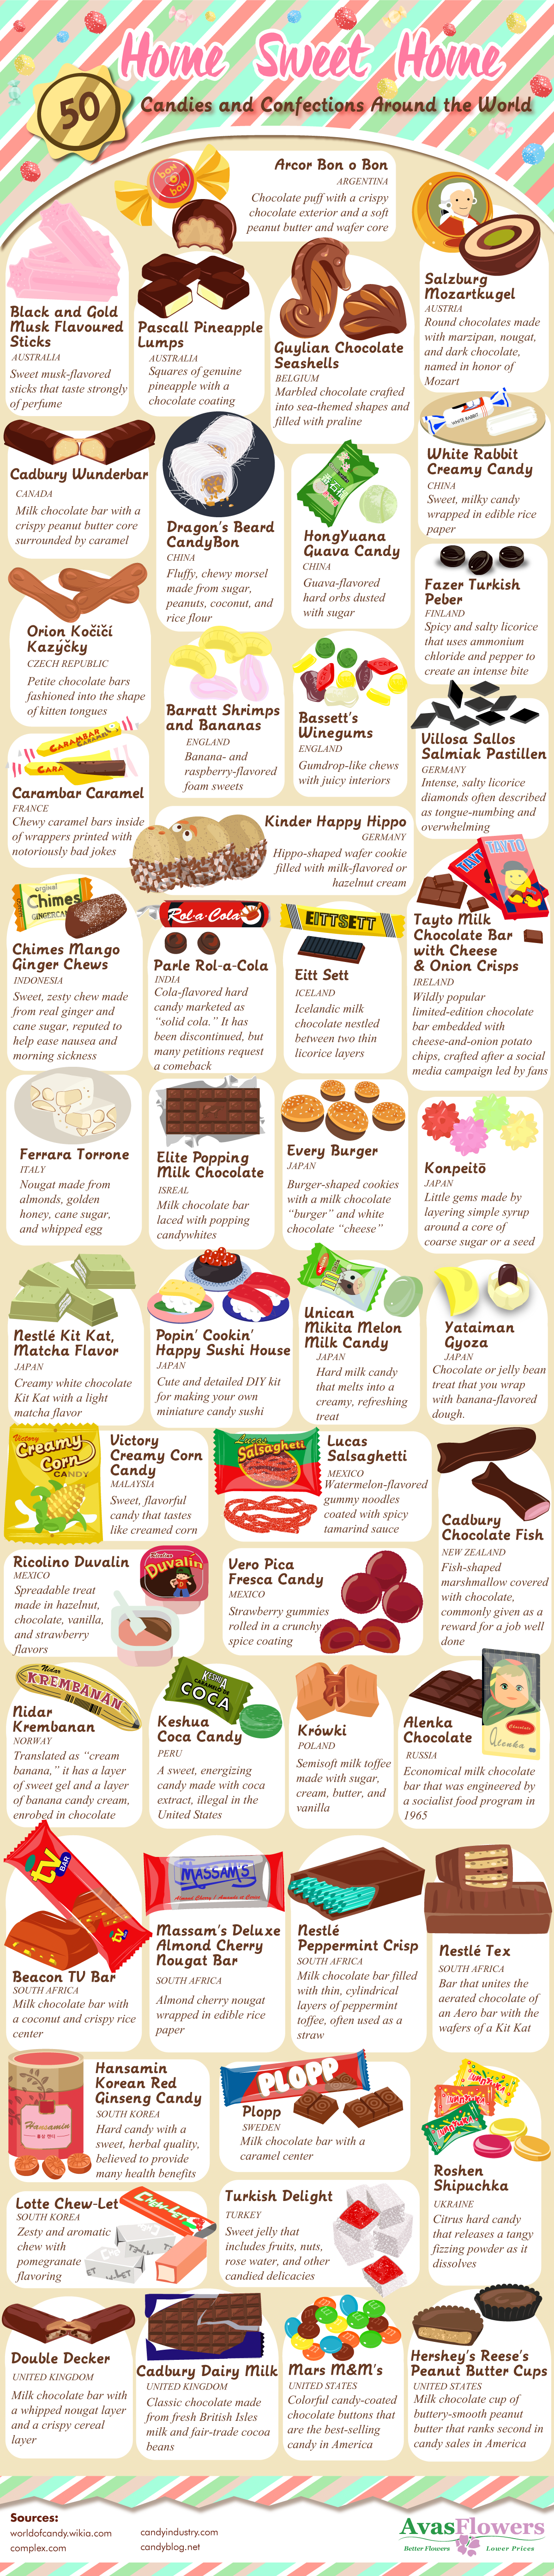 Home Sweet Home: Candies and Confections Around the World - Avasflowers.net - Infographic